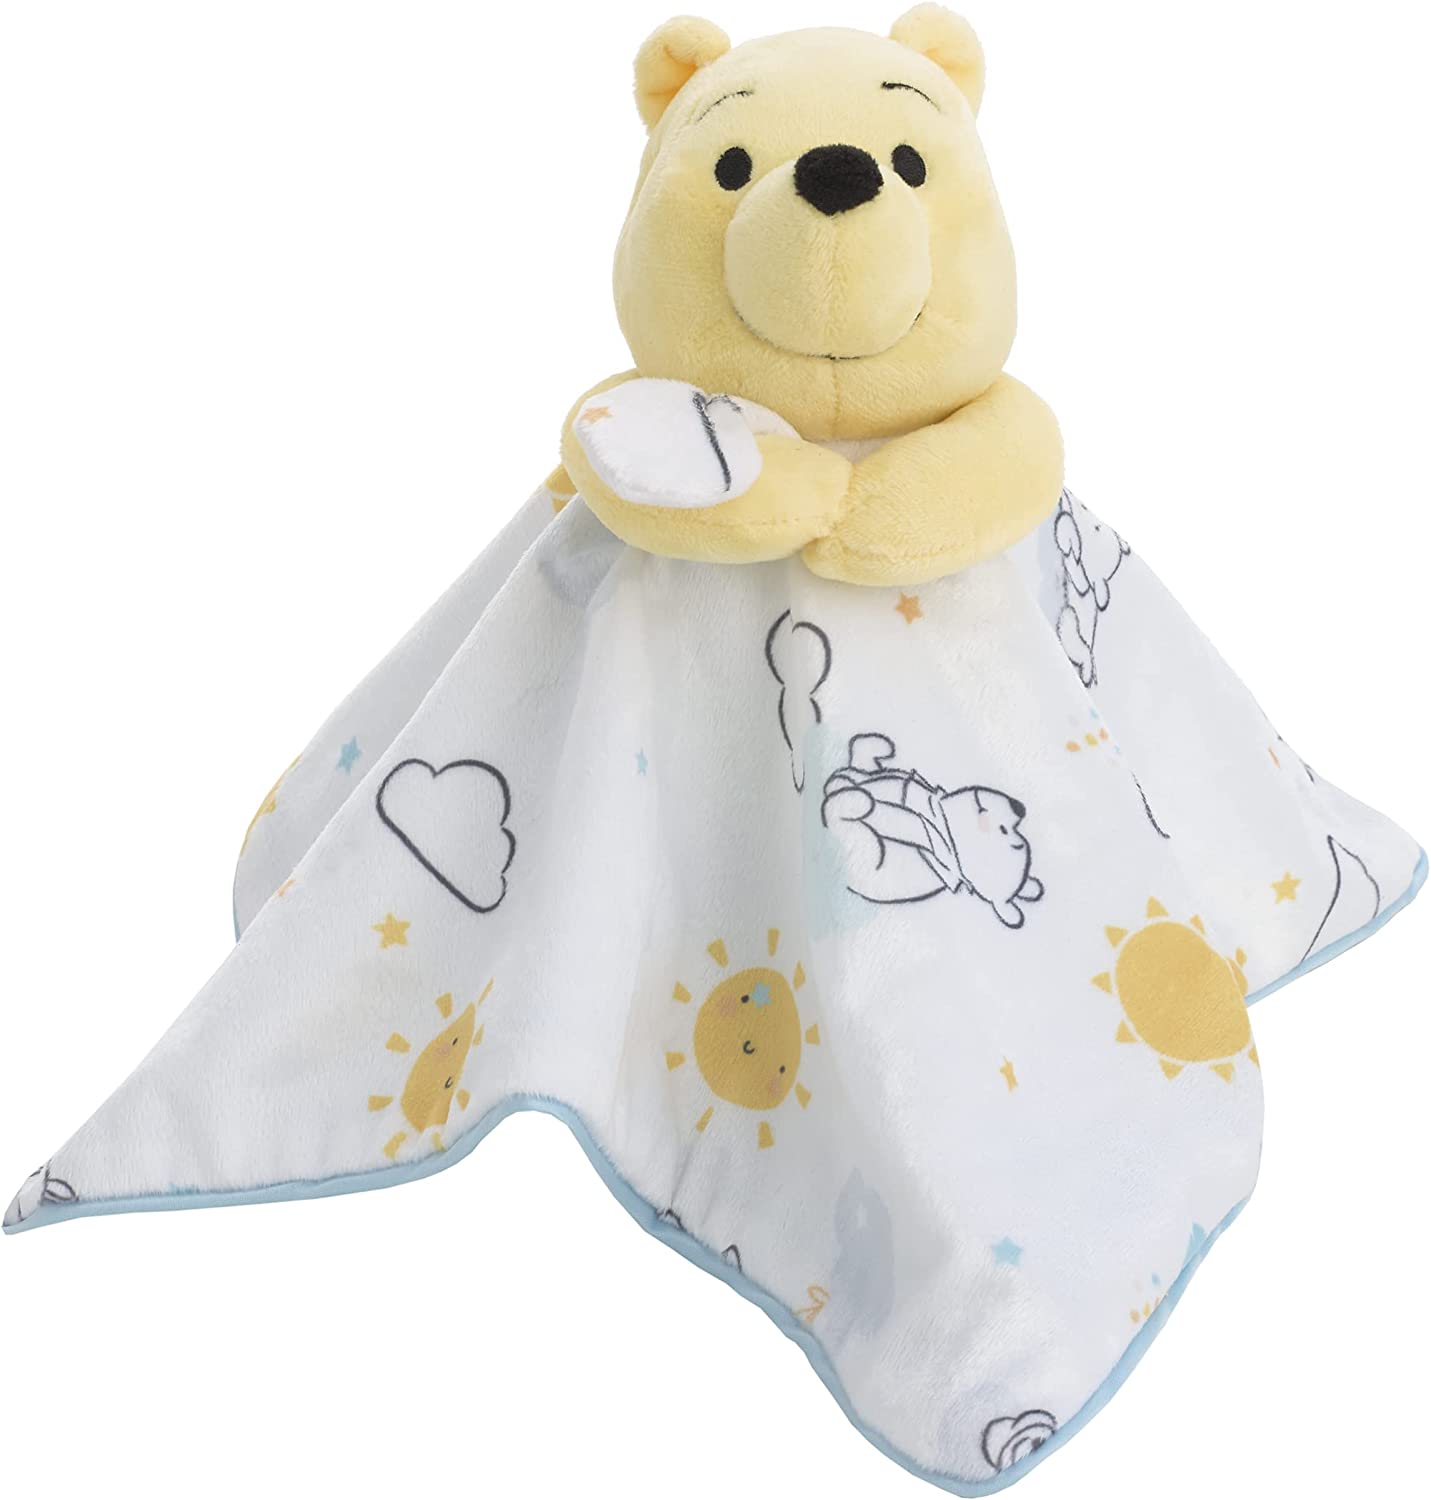 Disney Winnie The Pooh White, Yellow, and Aqua Cloud and Sun Lovey Security Blanket - image 1 of 5